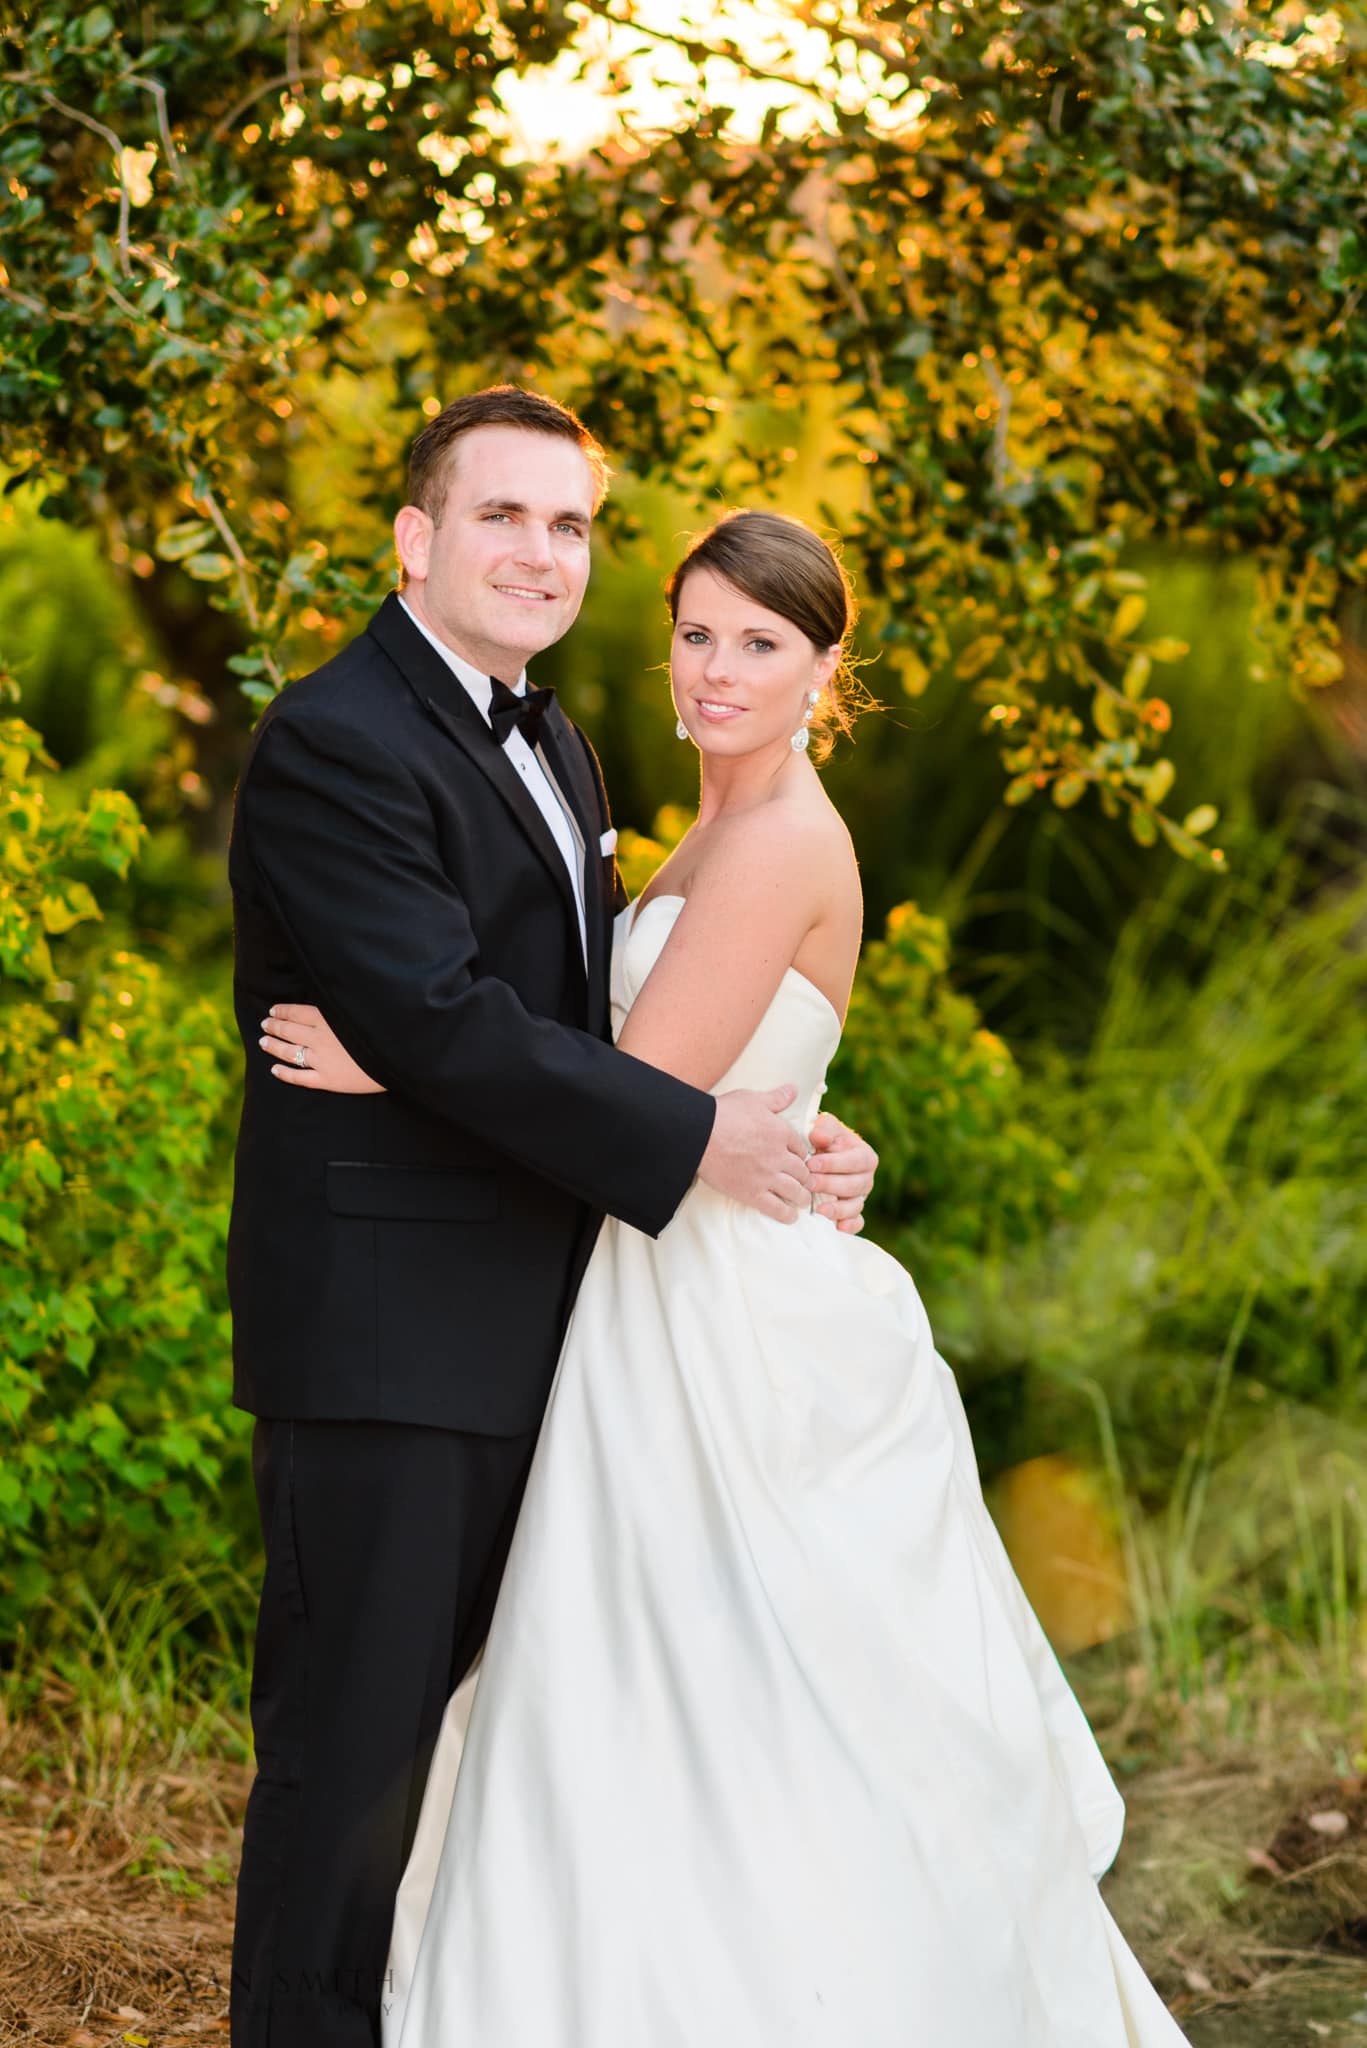 Portraits with the sunset filtering through the trees - Daniel Island Club - Charleston, SC